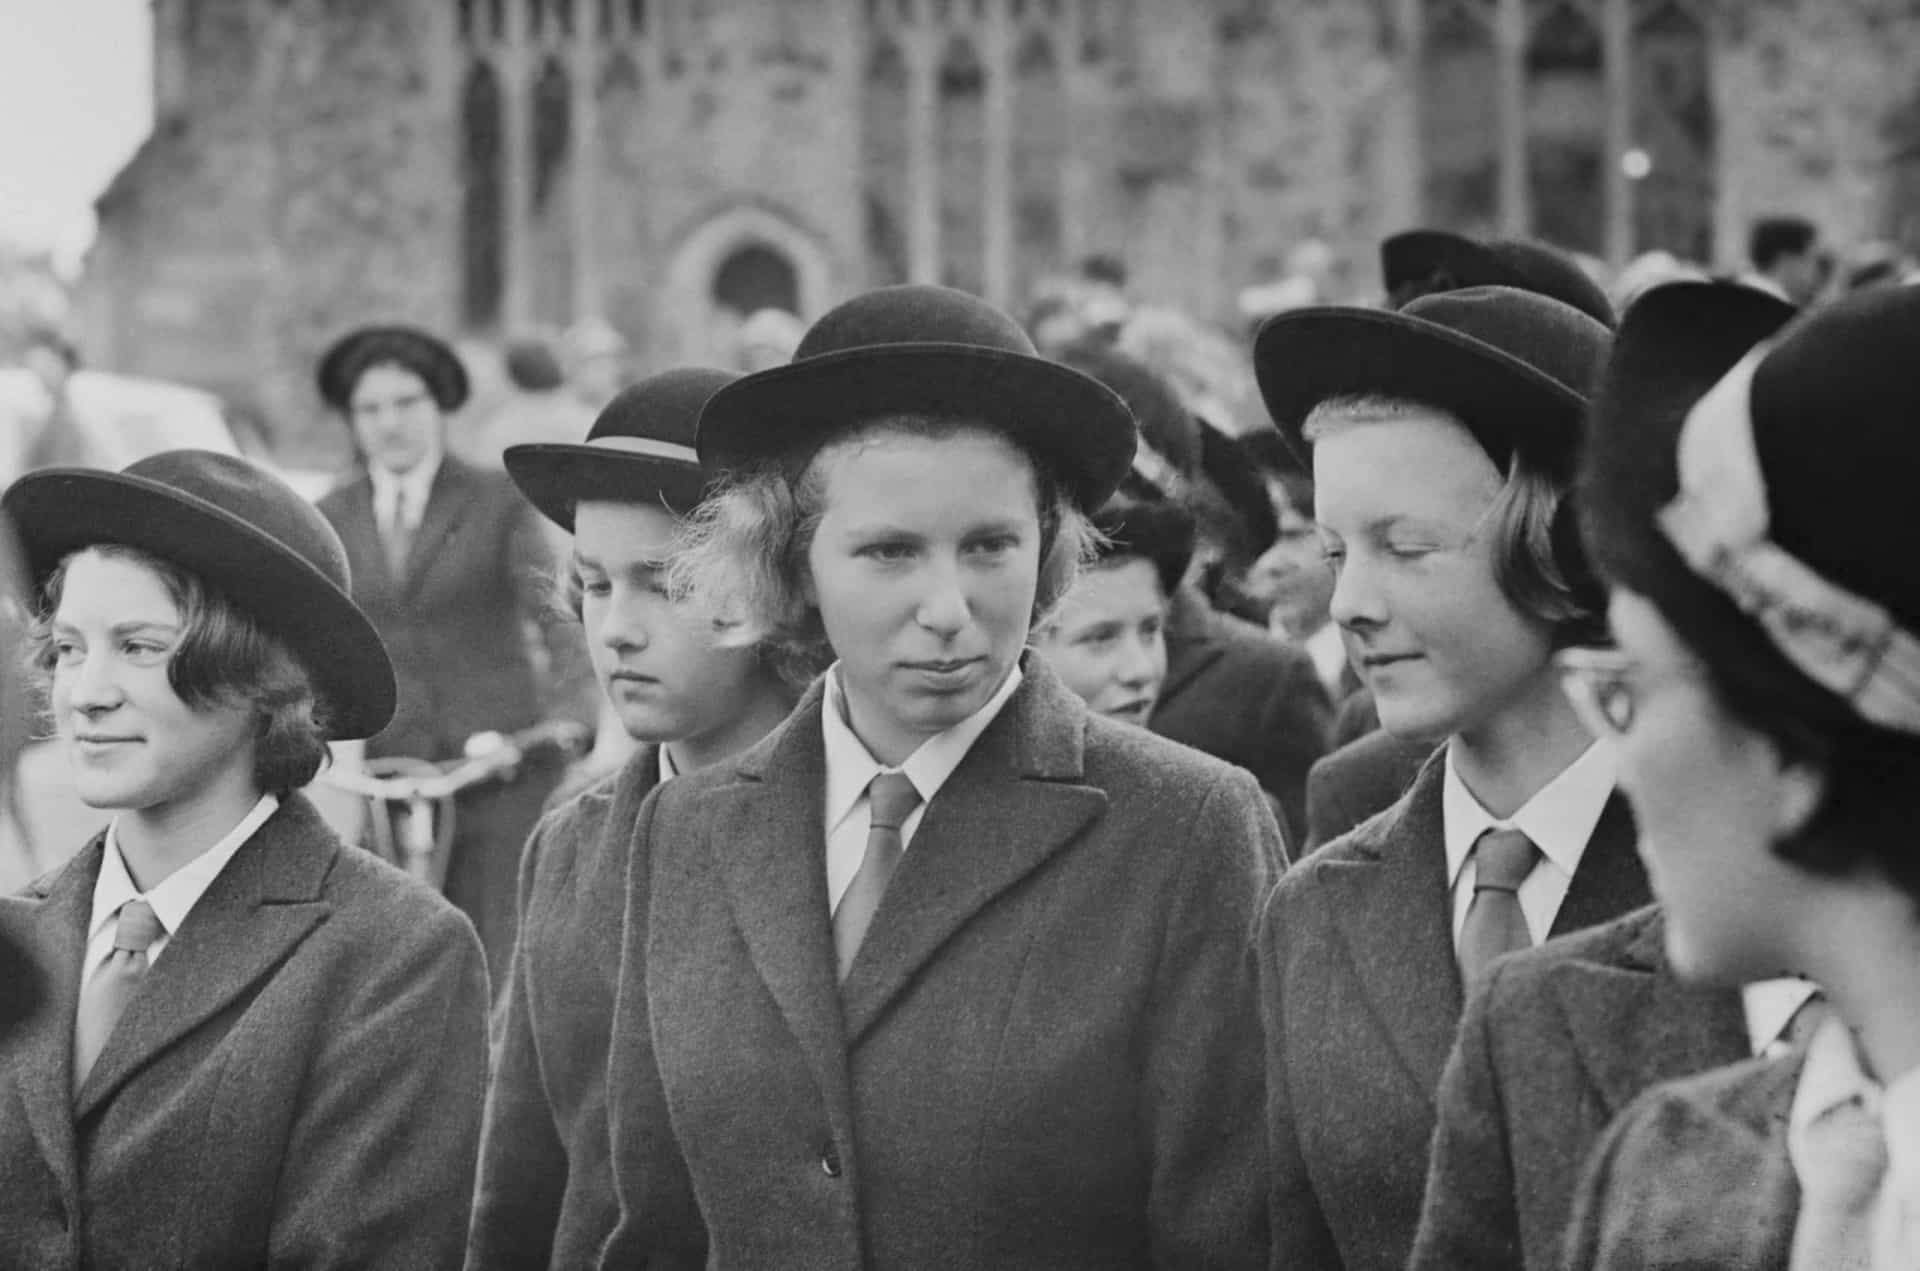 <p>Queen Elizabeth's daughter Princess Anne (pictured center)—later Anne, Princess Royal—with fellow pupils during her first term at Benenden School, an independent boarding school for girls in Kent, England, on September 23, 1963.</p>